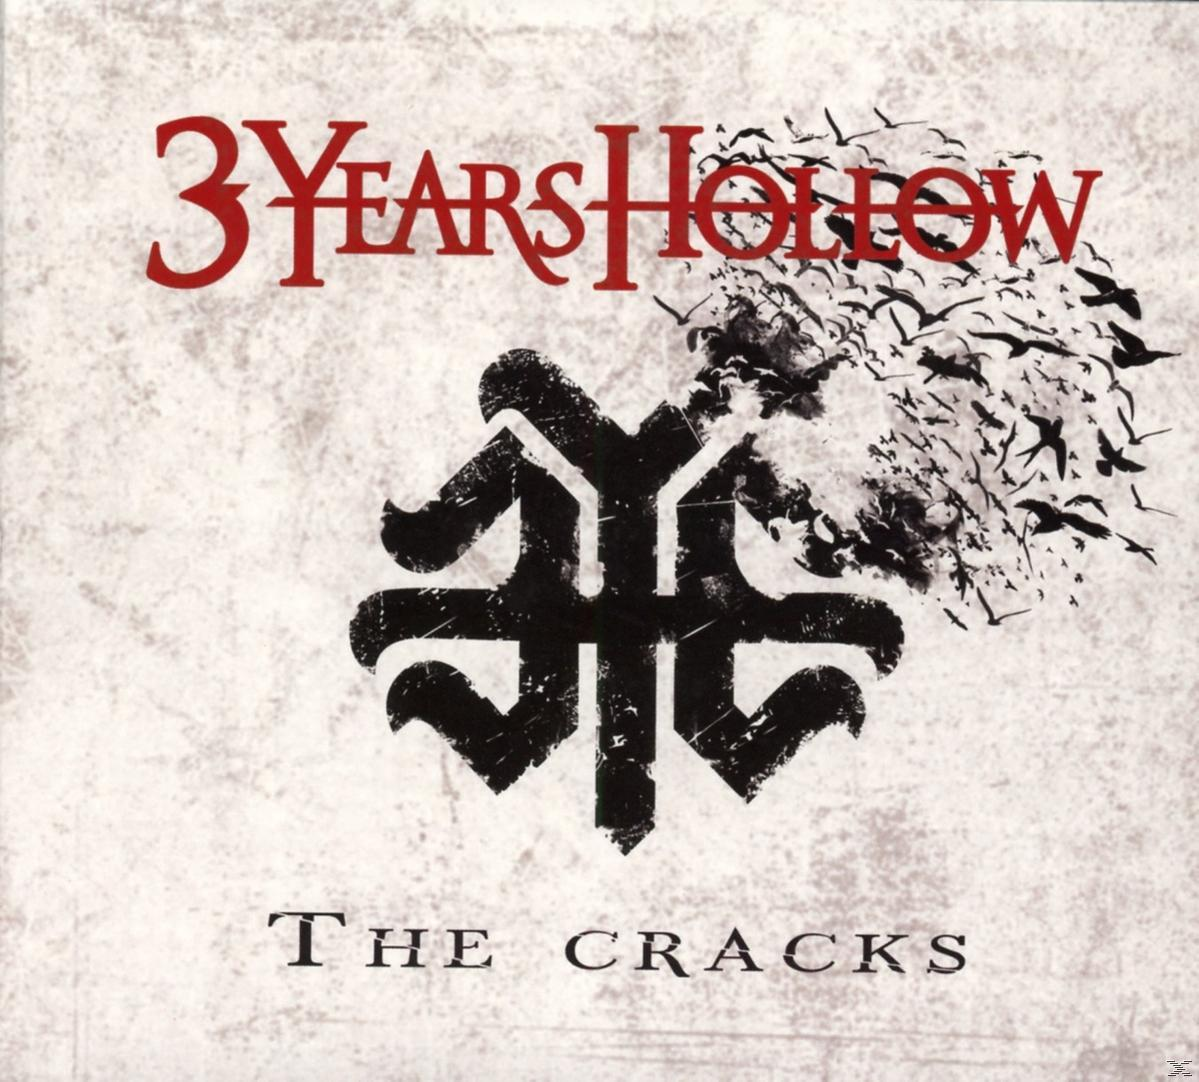 The Hollow - - 3 Cracks (CD) Years